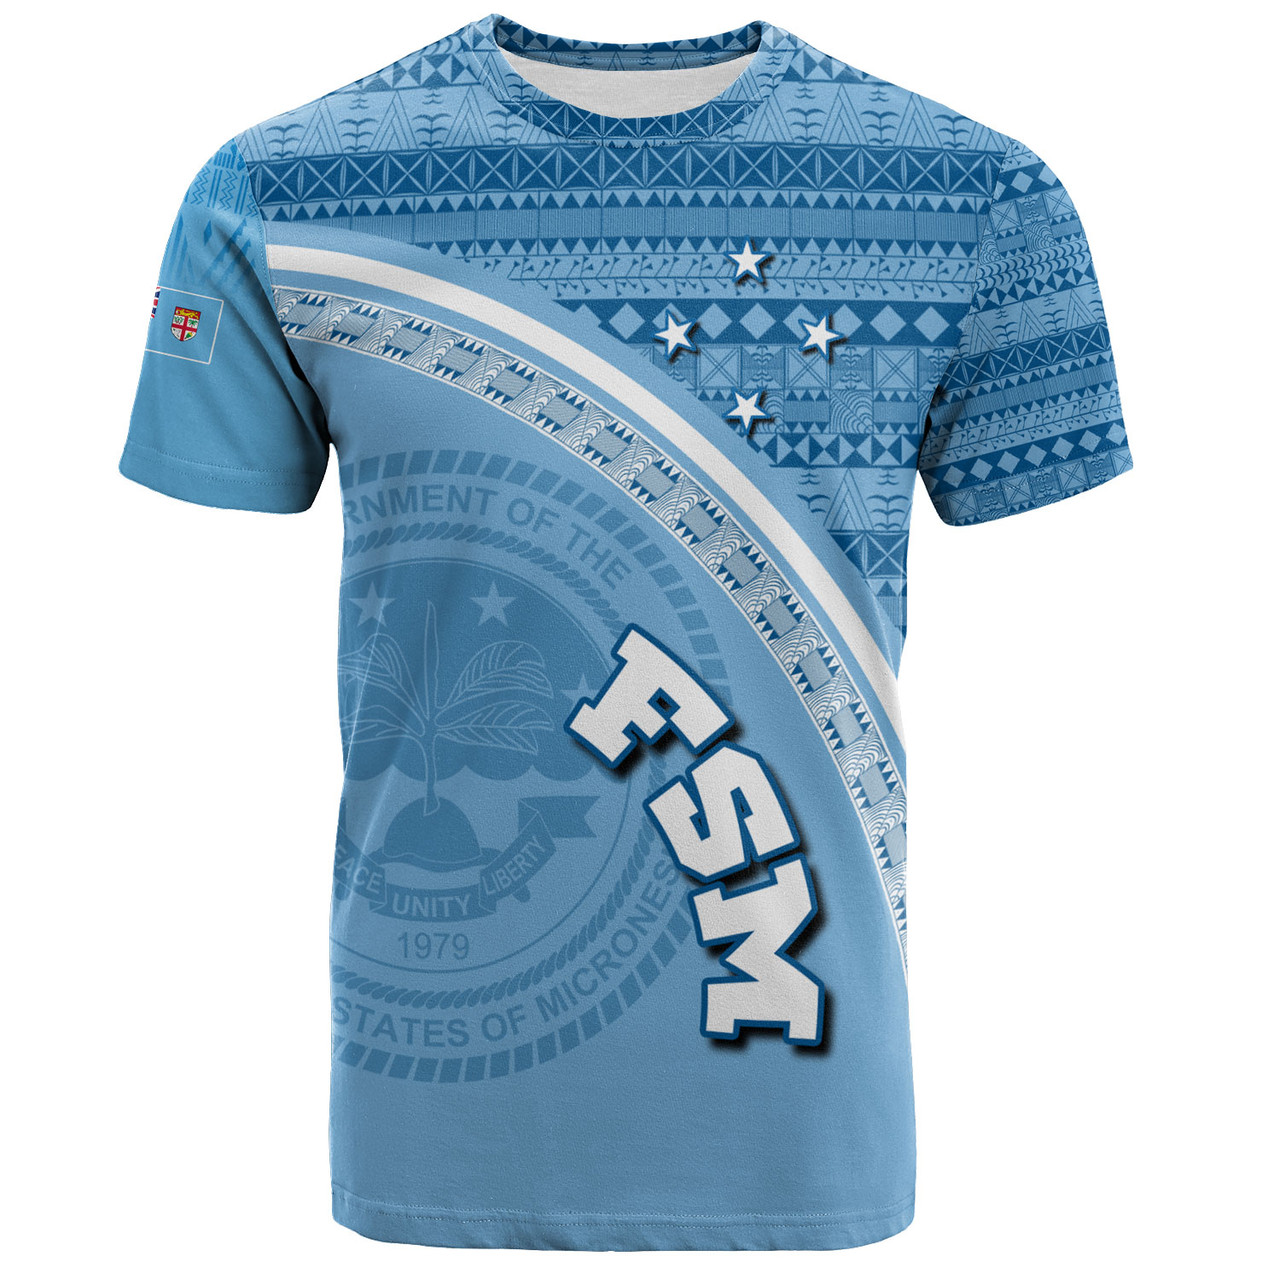 Federated States Of Micronesia Custom Personalised T-Shirt Micronesia Tribal Patterns Curve Style